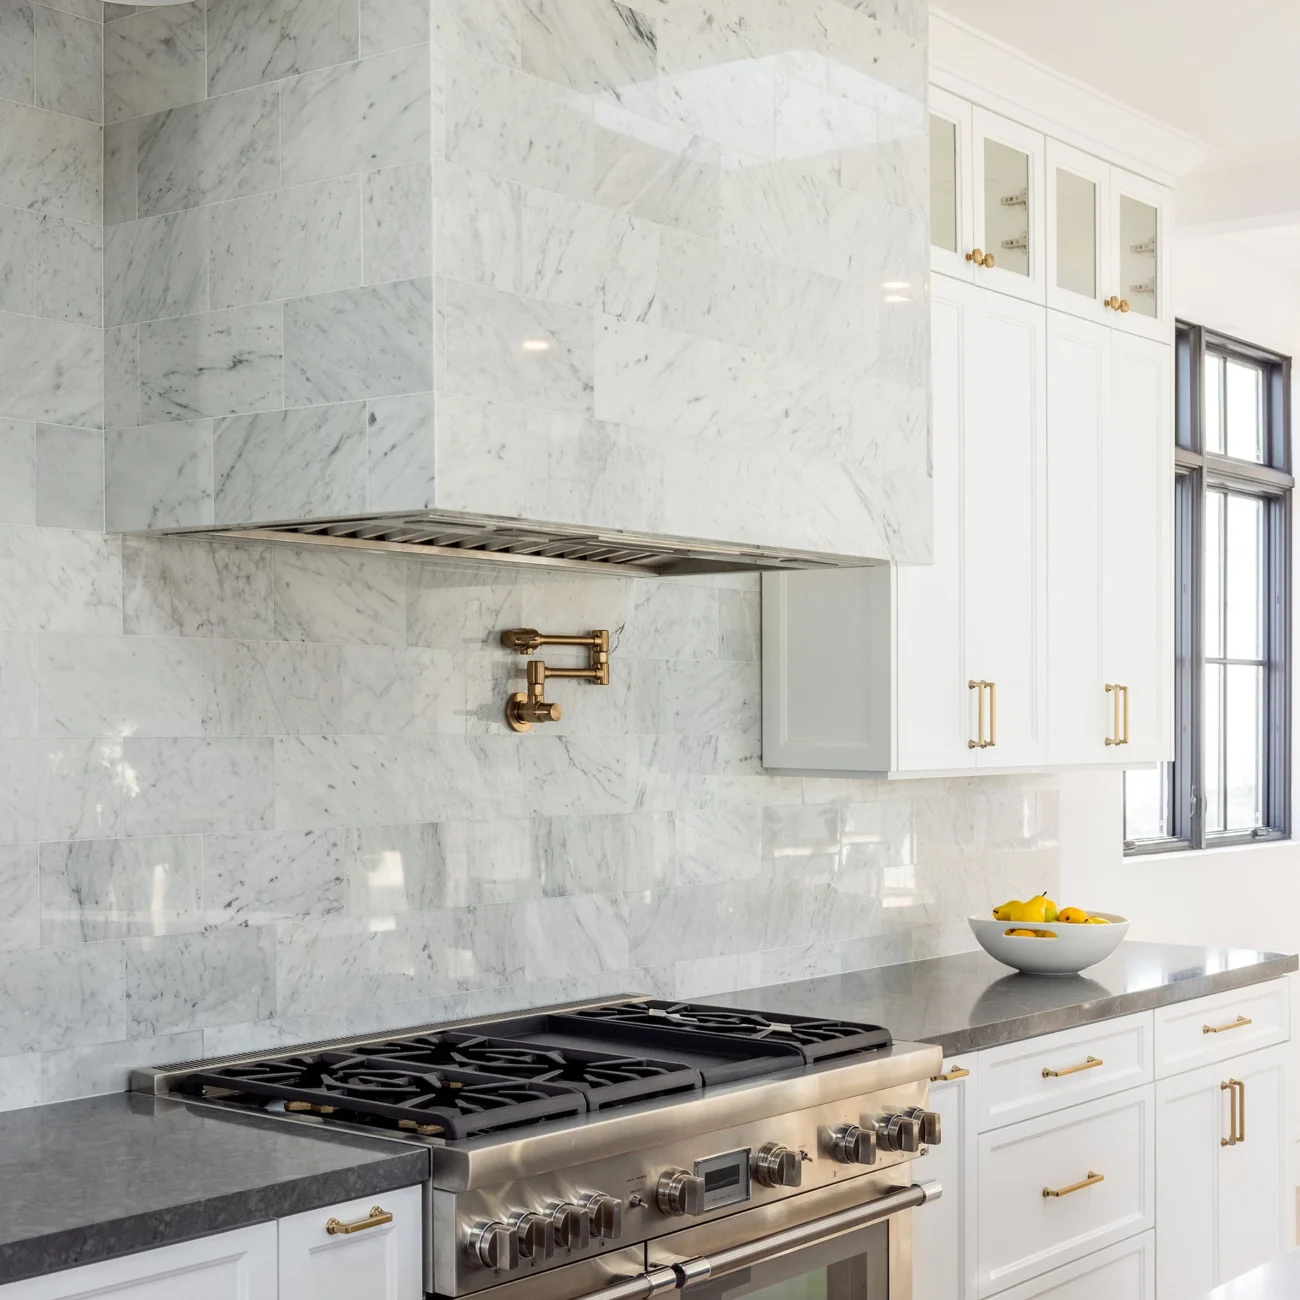 Christine Vroom Interiors | 36th | Costal kitchen stove with tiled hood